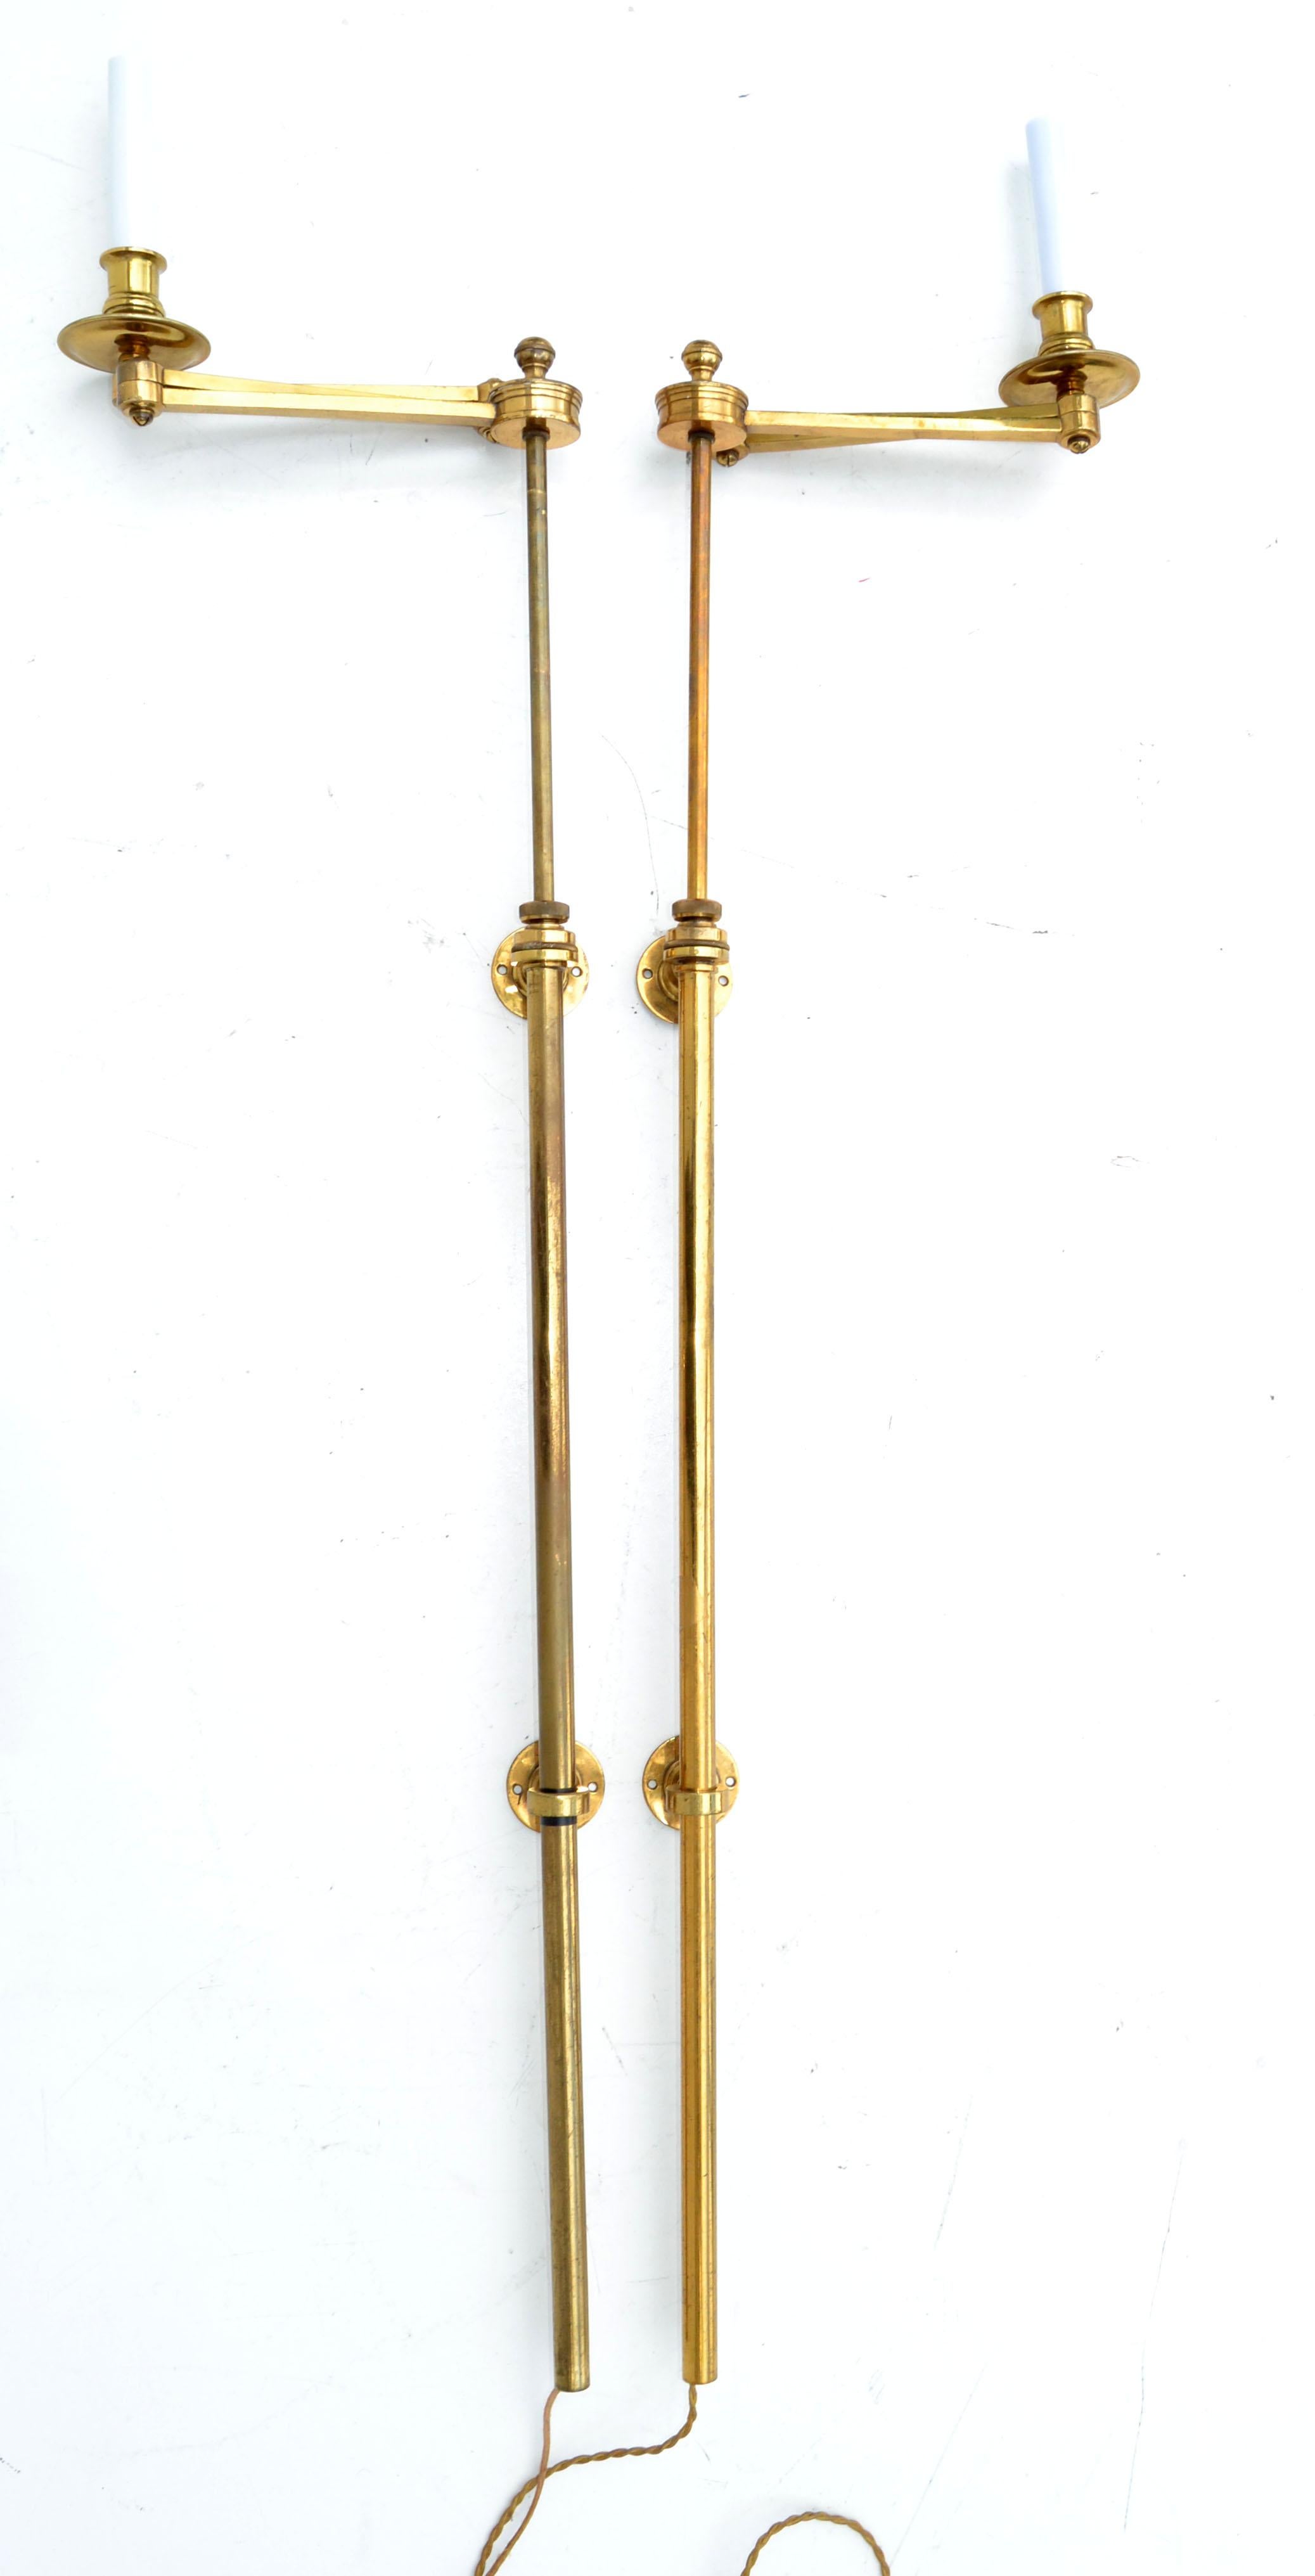 Pair of Mid-Century Modern retractable sconces, wall lamps, wall lights by Maison Bagues, made in France. One of the last Parisian Bronzier 
Back plate measures: 2.75 inches. Costume Junction Box Covers are available for purchase. 
Comes with